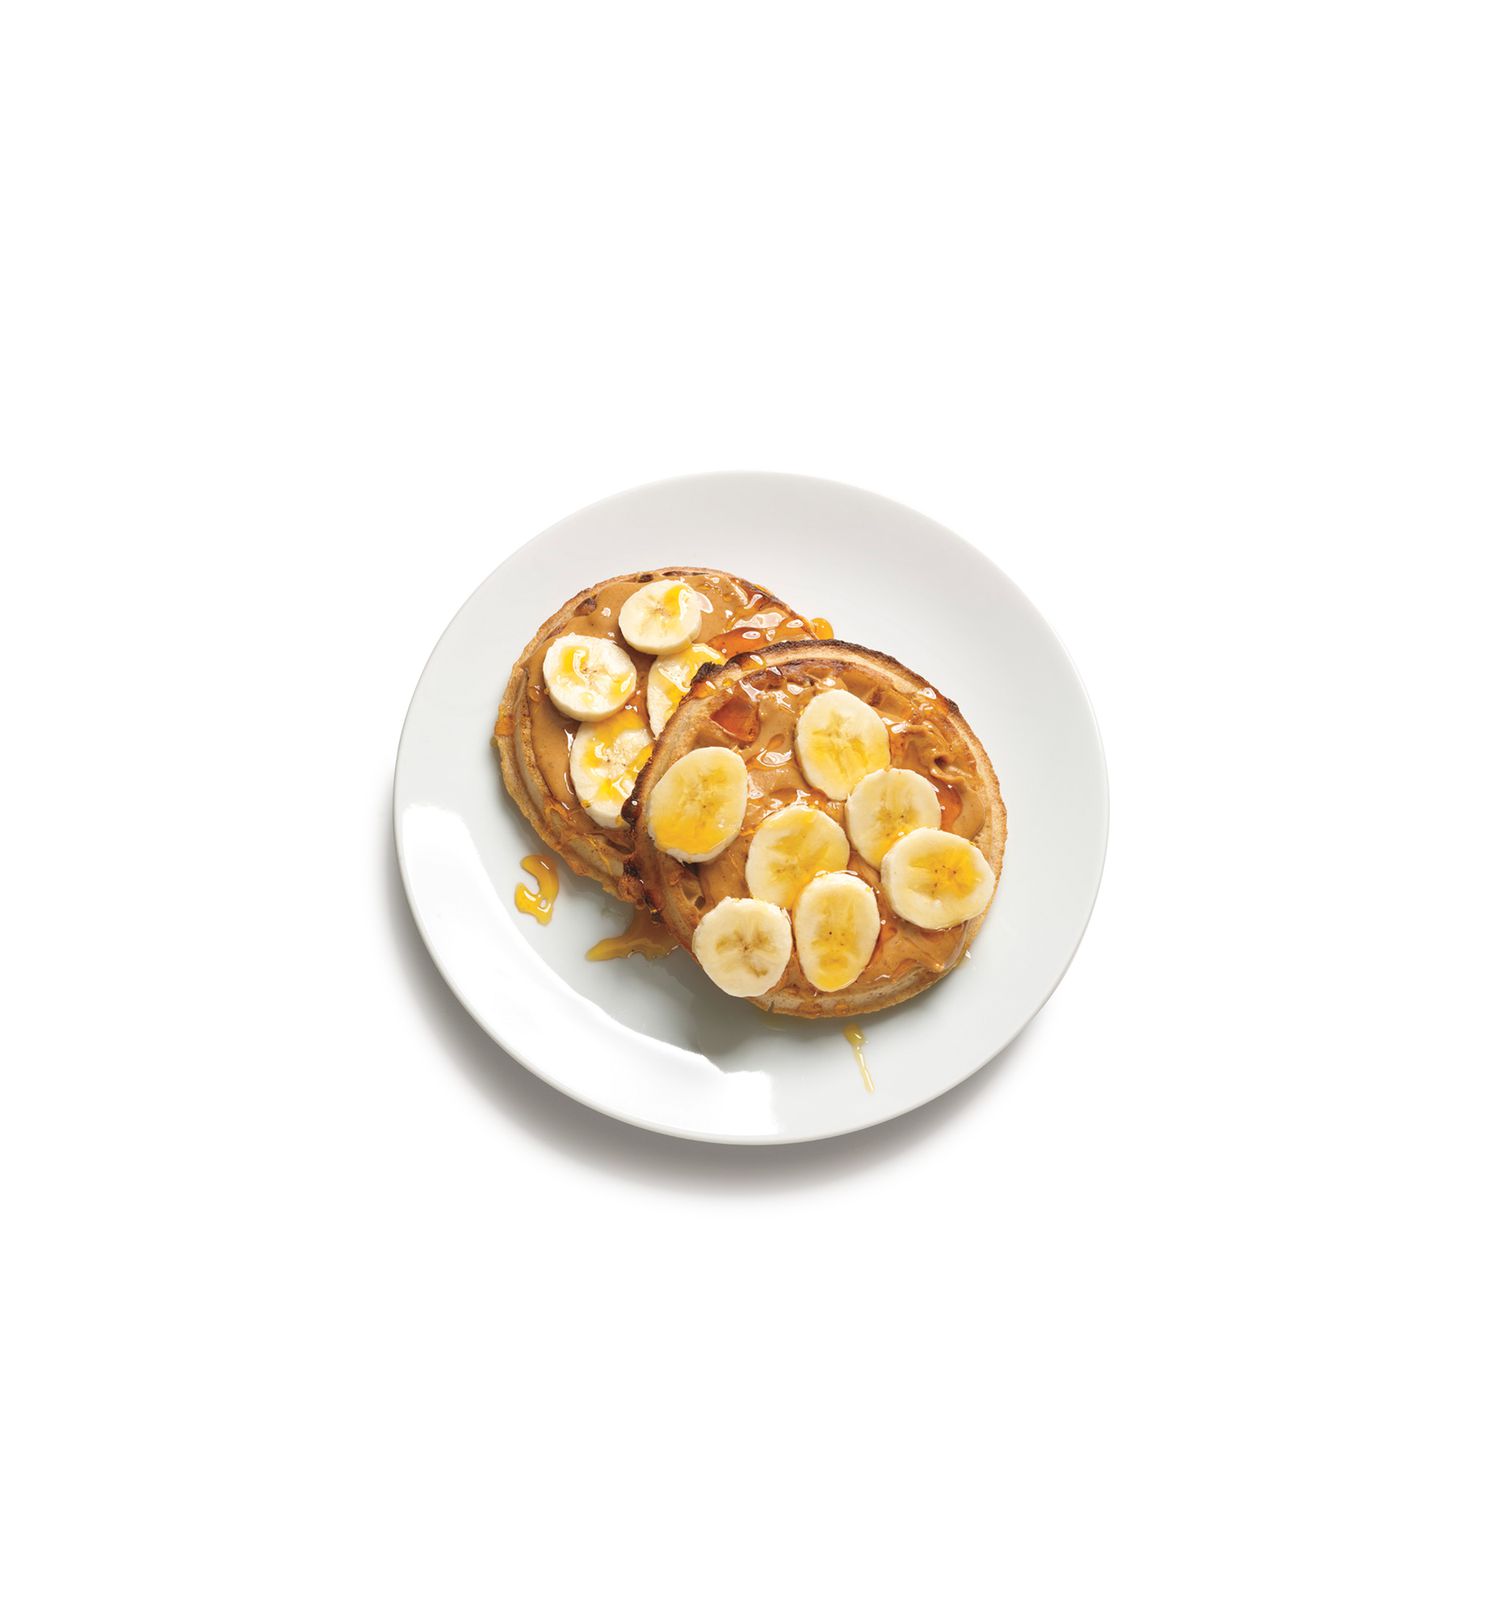 Waffles With Nut Butter and Bananas